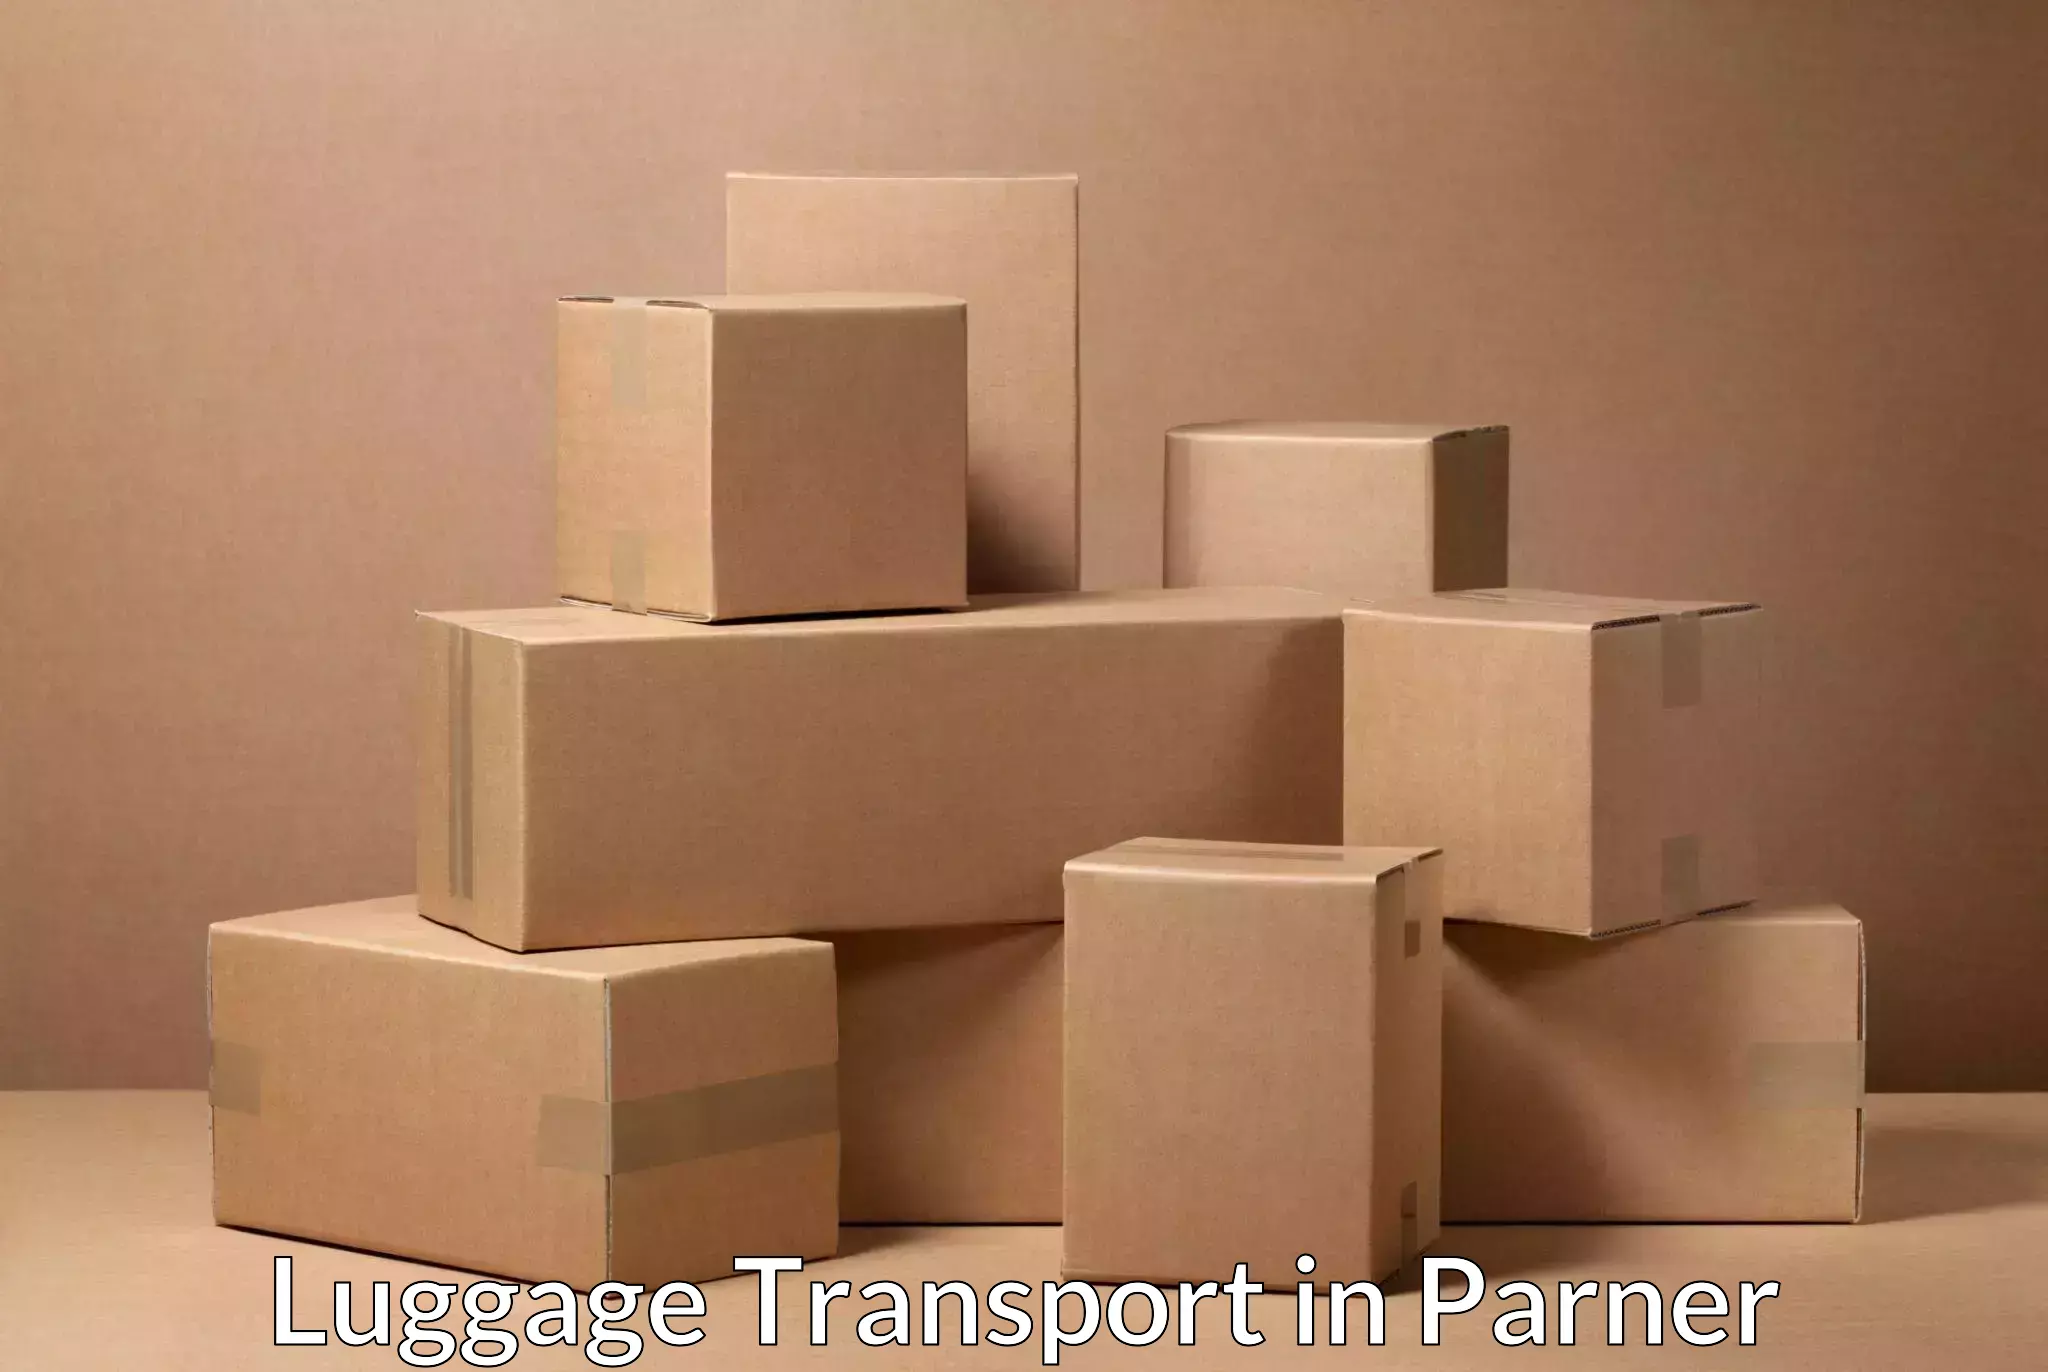 Luggage dispatch service in Parner